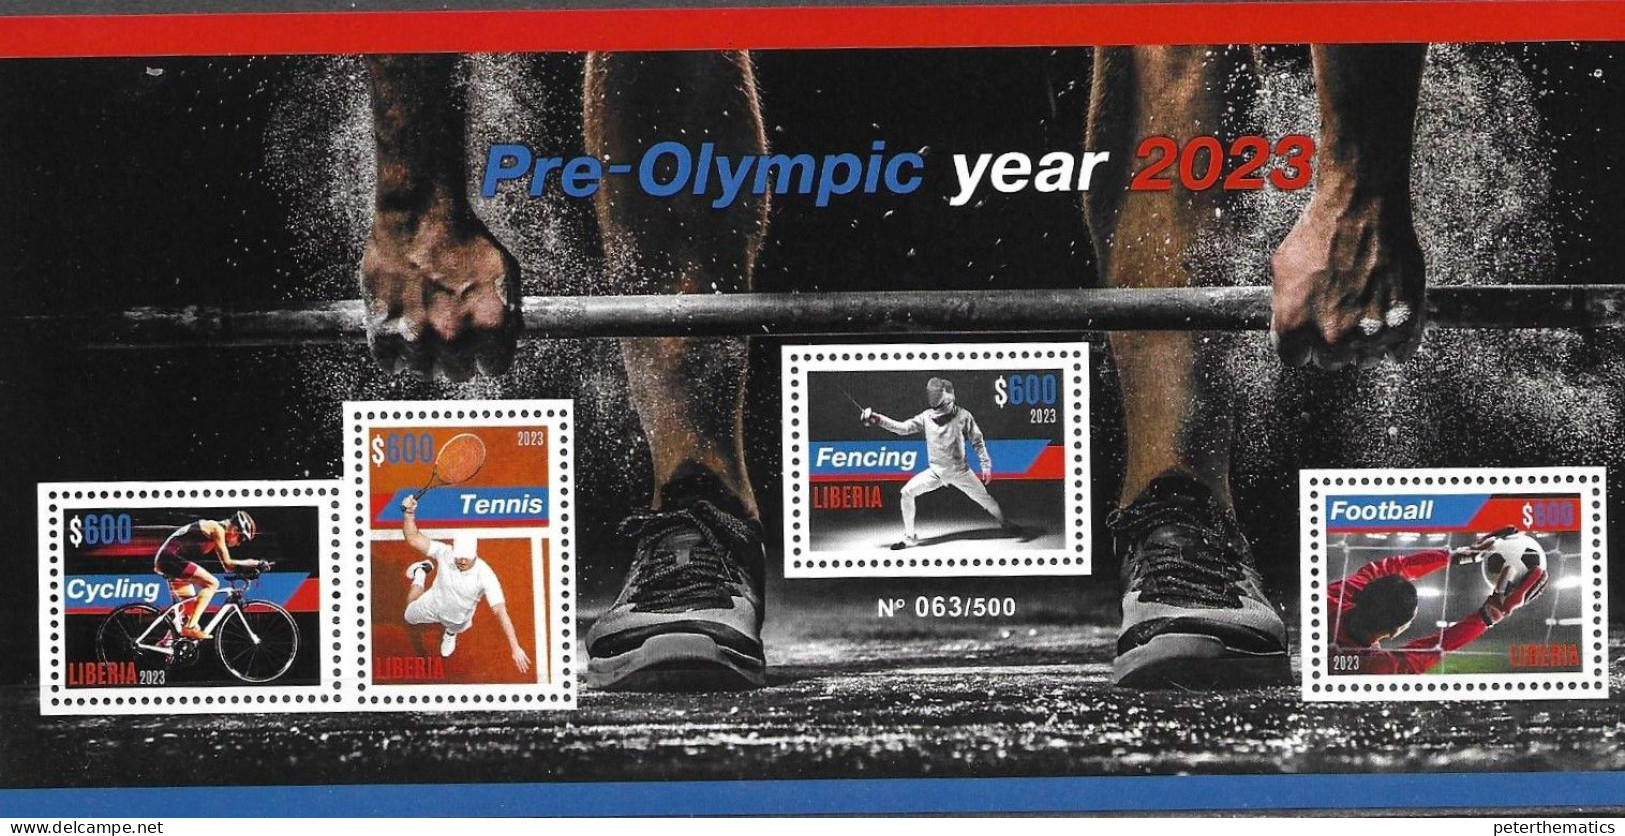 LIBERIA, 2023, MNH, PREOLYMPIC ISSUE, PARIS OLYMPICS, FOOTBALL, CYCLING, TENNIS, FENCING, LIMITED NUMBERED SLT, OFFICIAL - Estate 2024 : Parigi